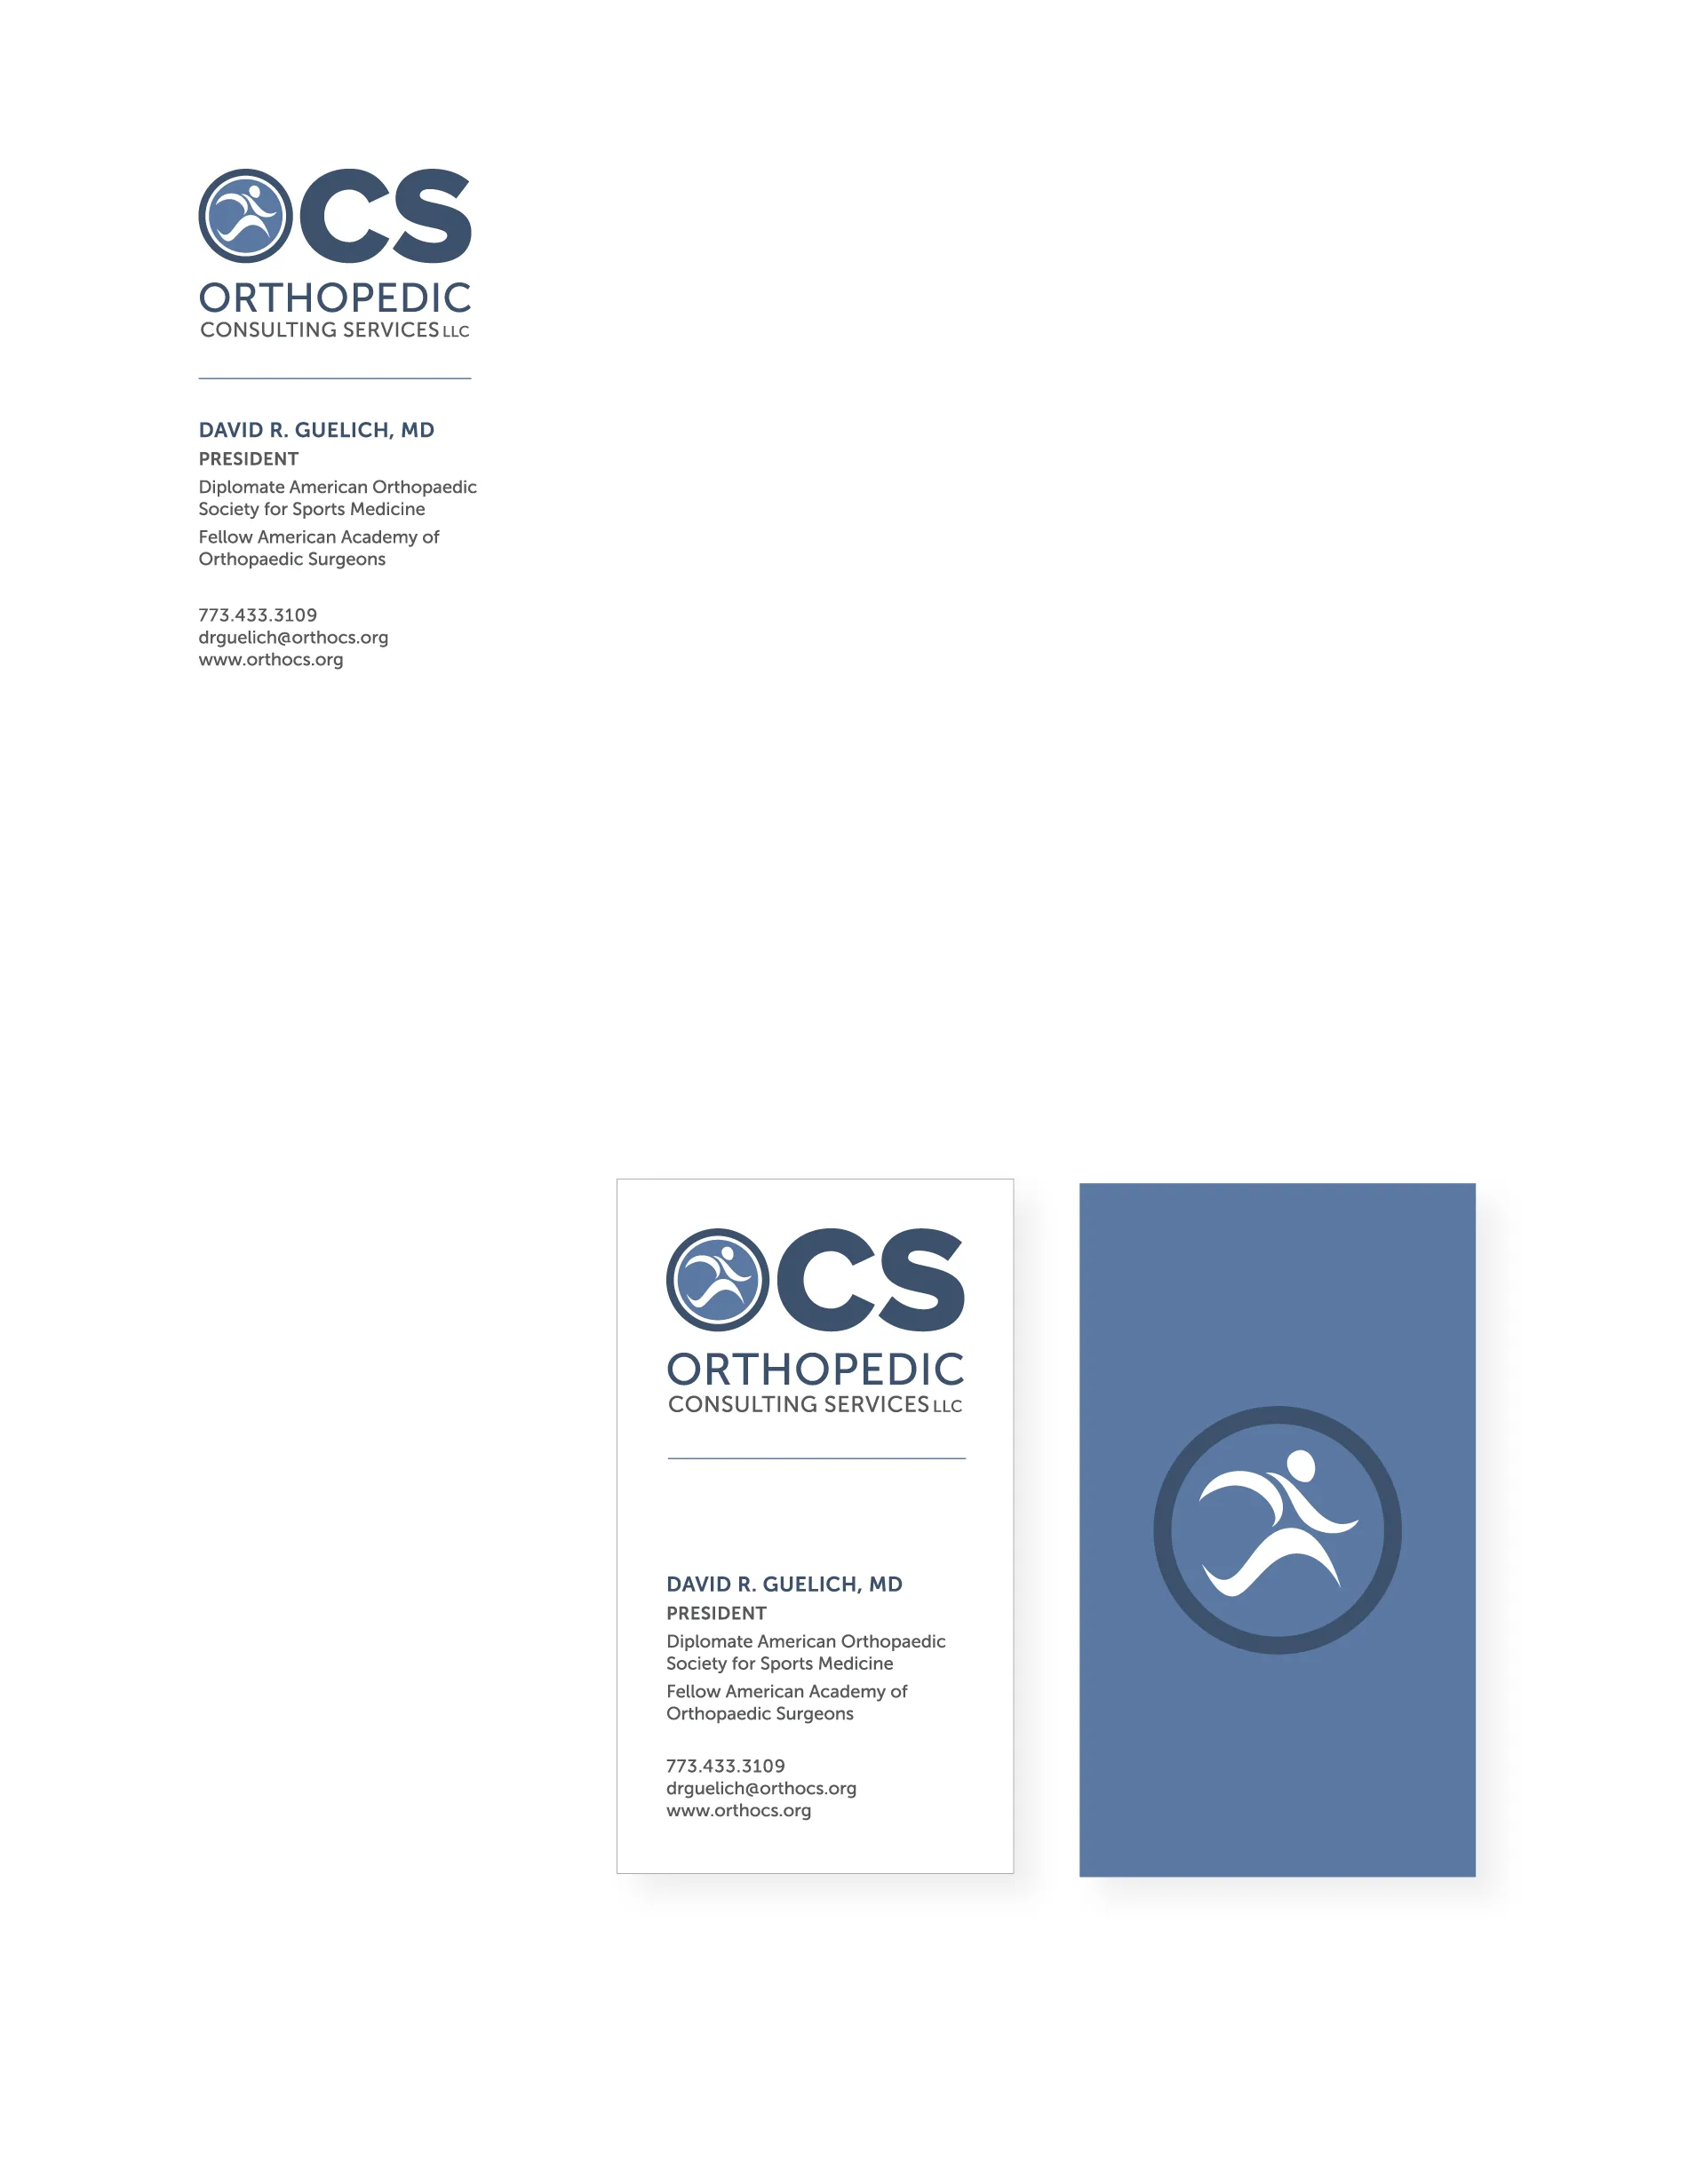 Orthopedic Consulting Services letterhead and business card design